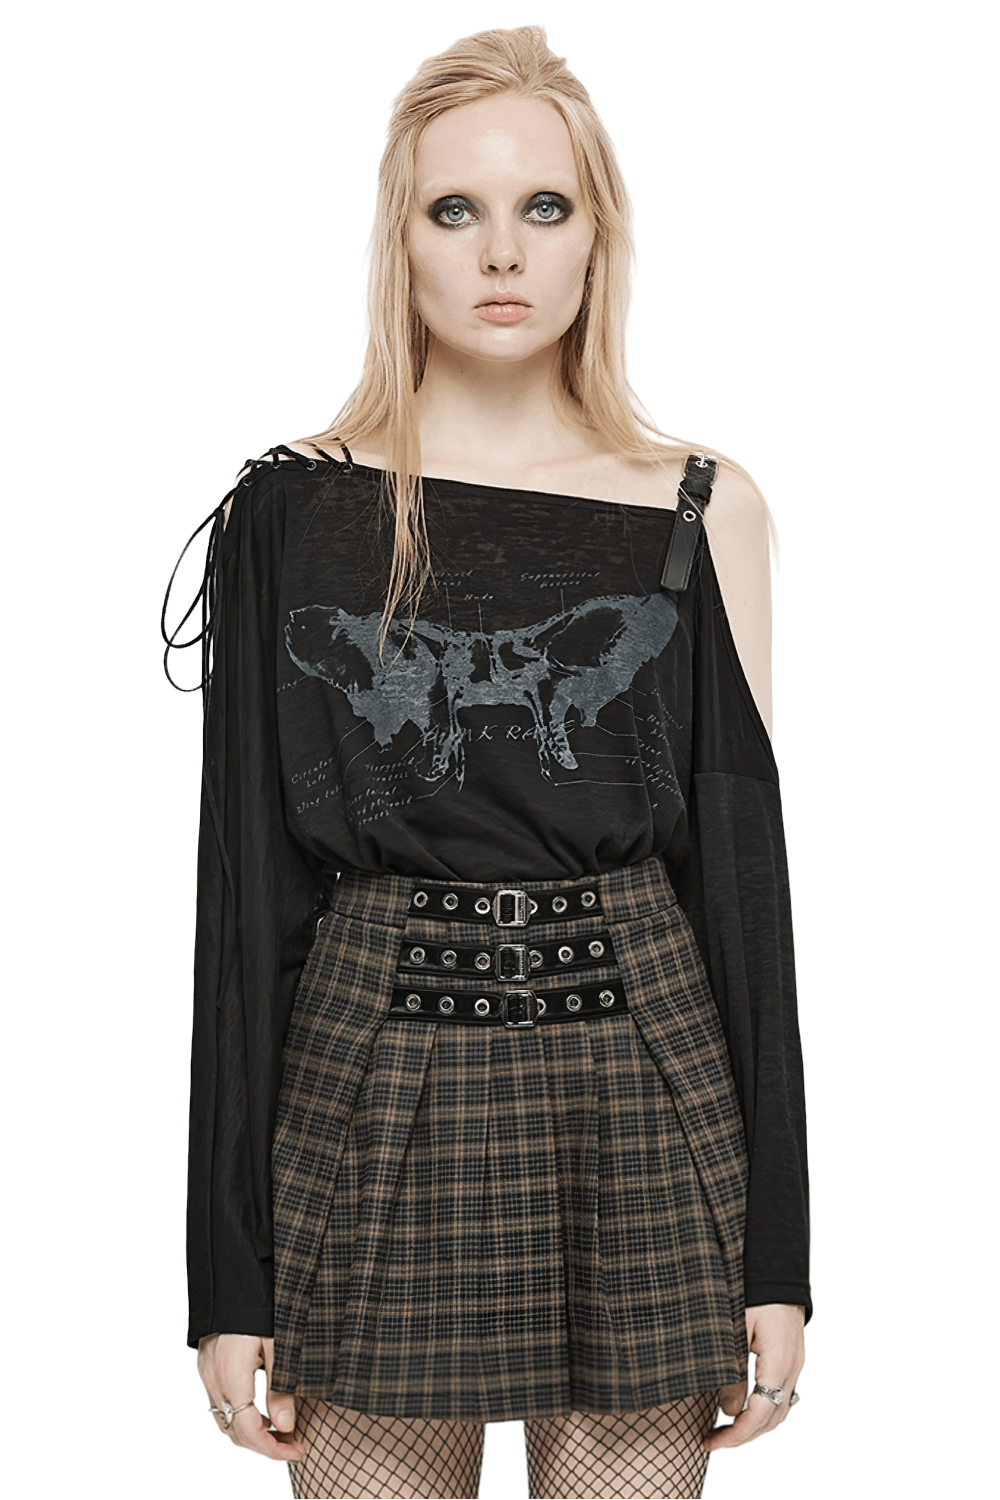 Skull Print Off-the-Shoulder with Long Sleeves Top